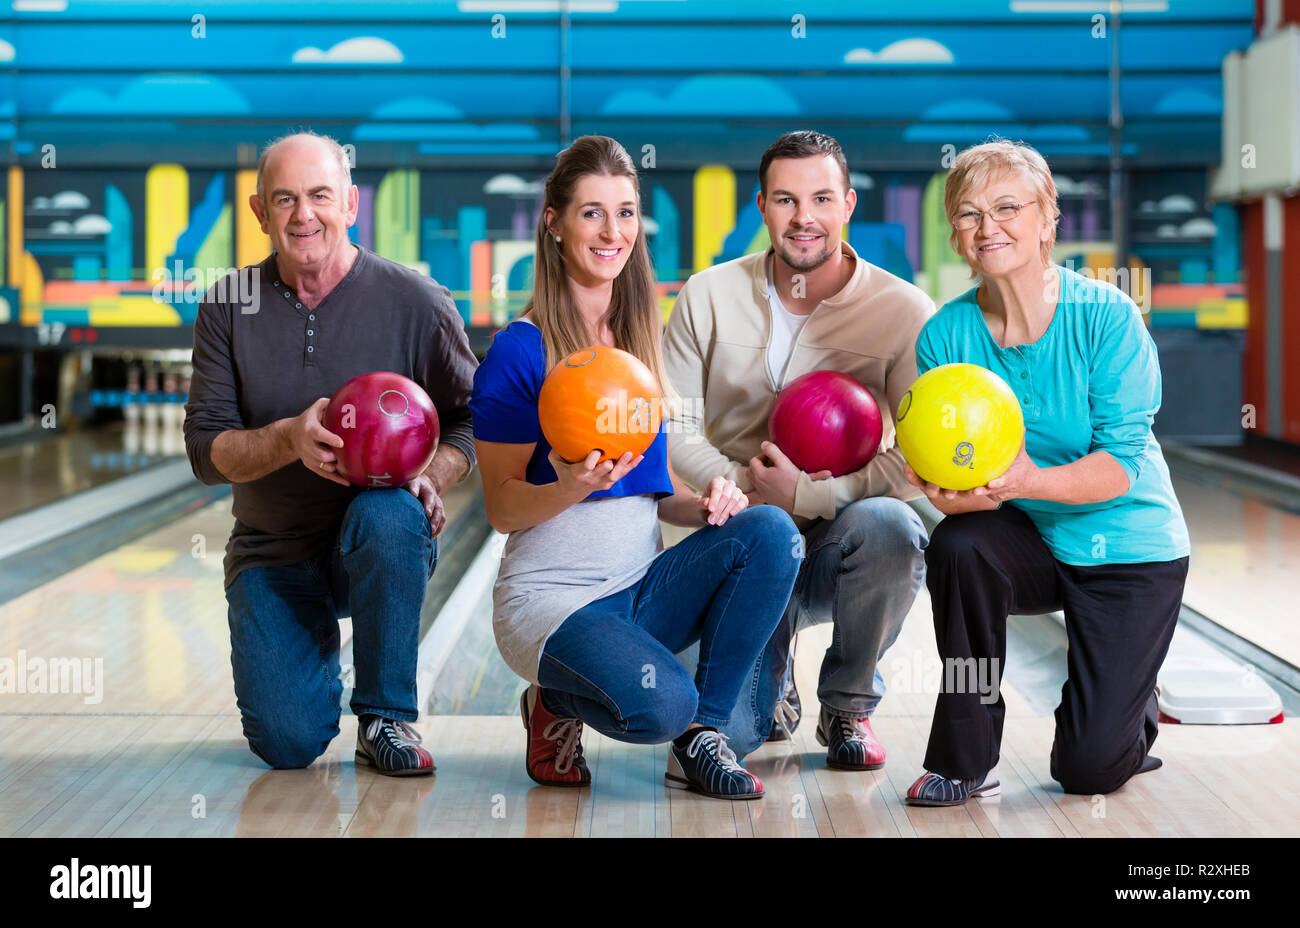 Family with multi colored bowling ball posing Stock Photo